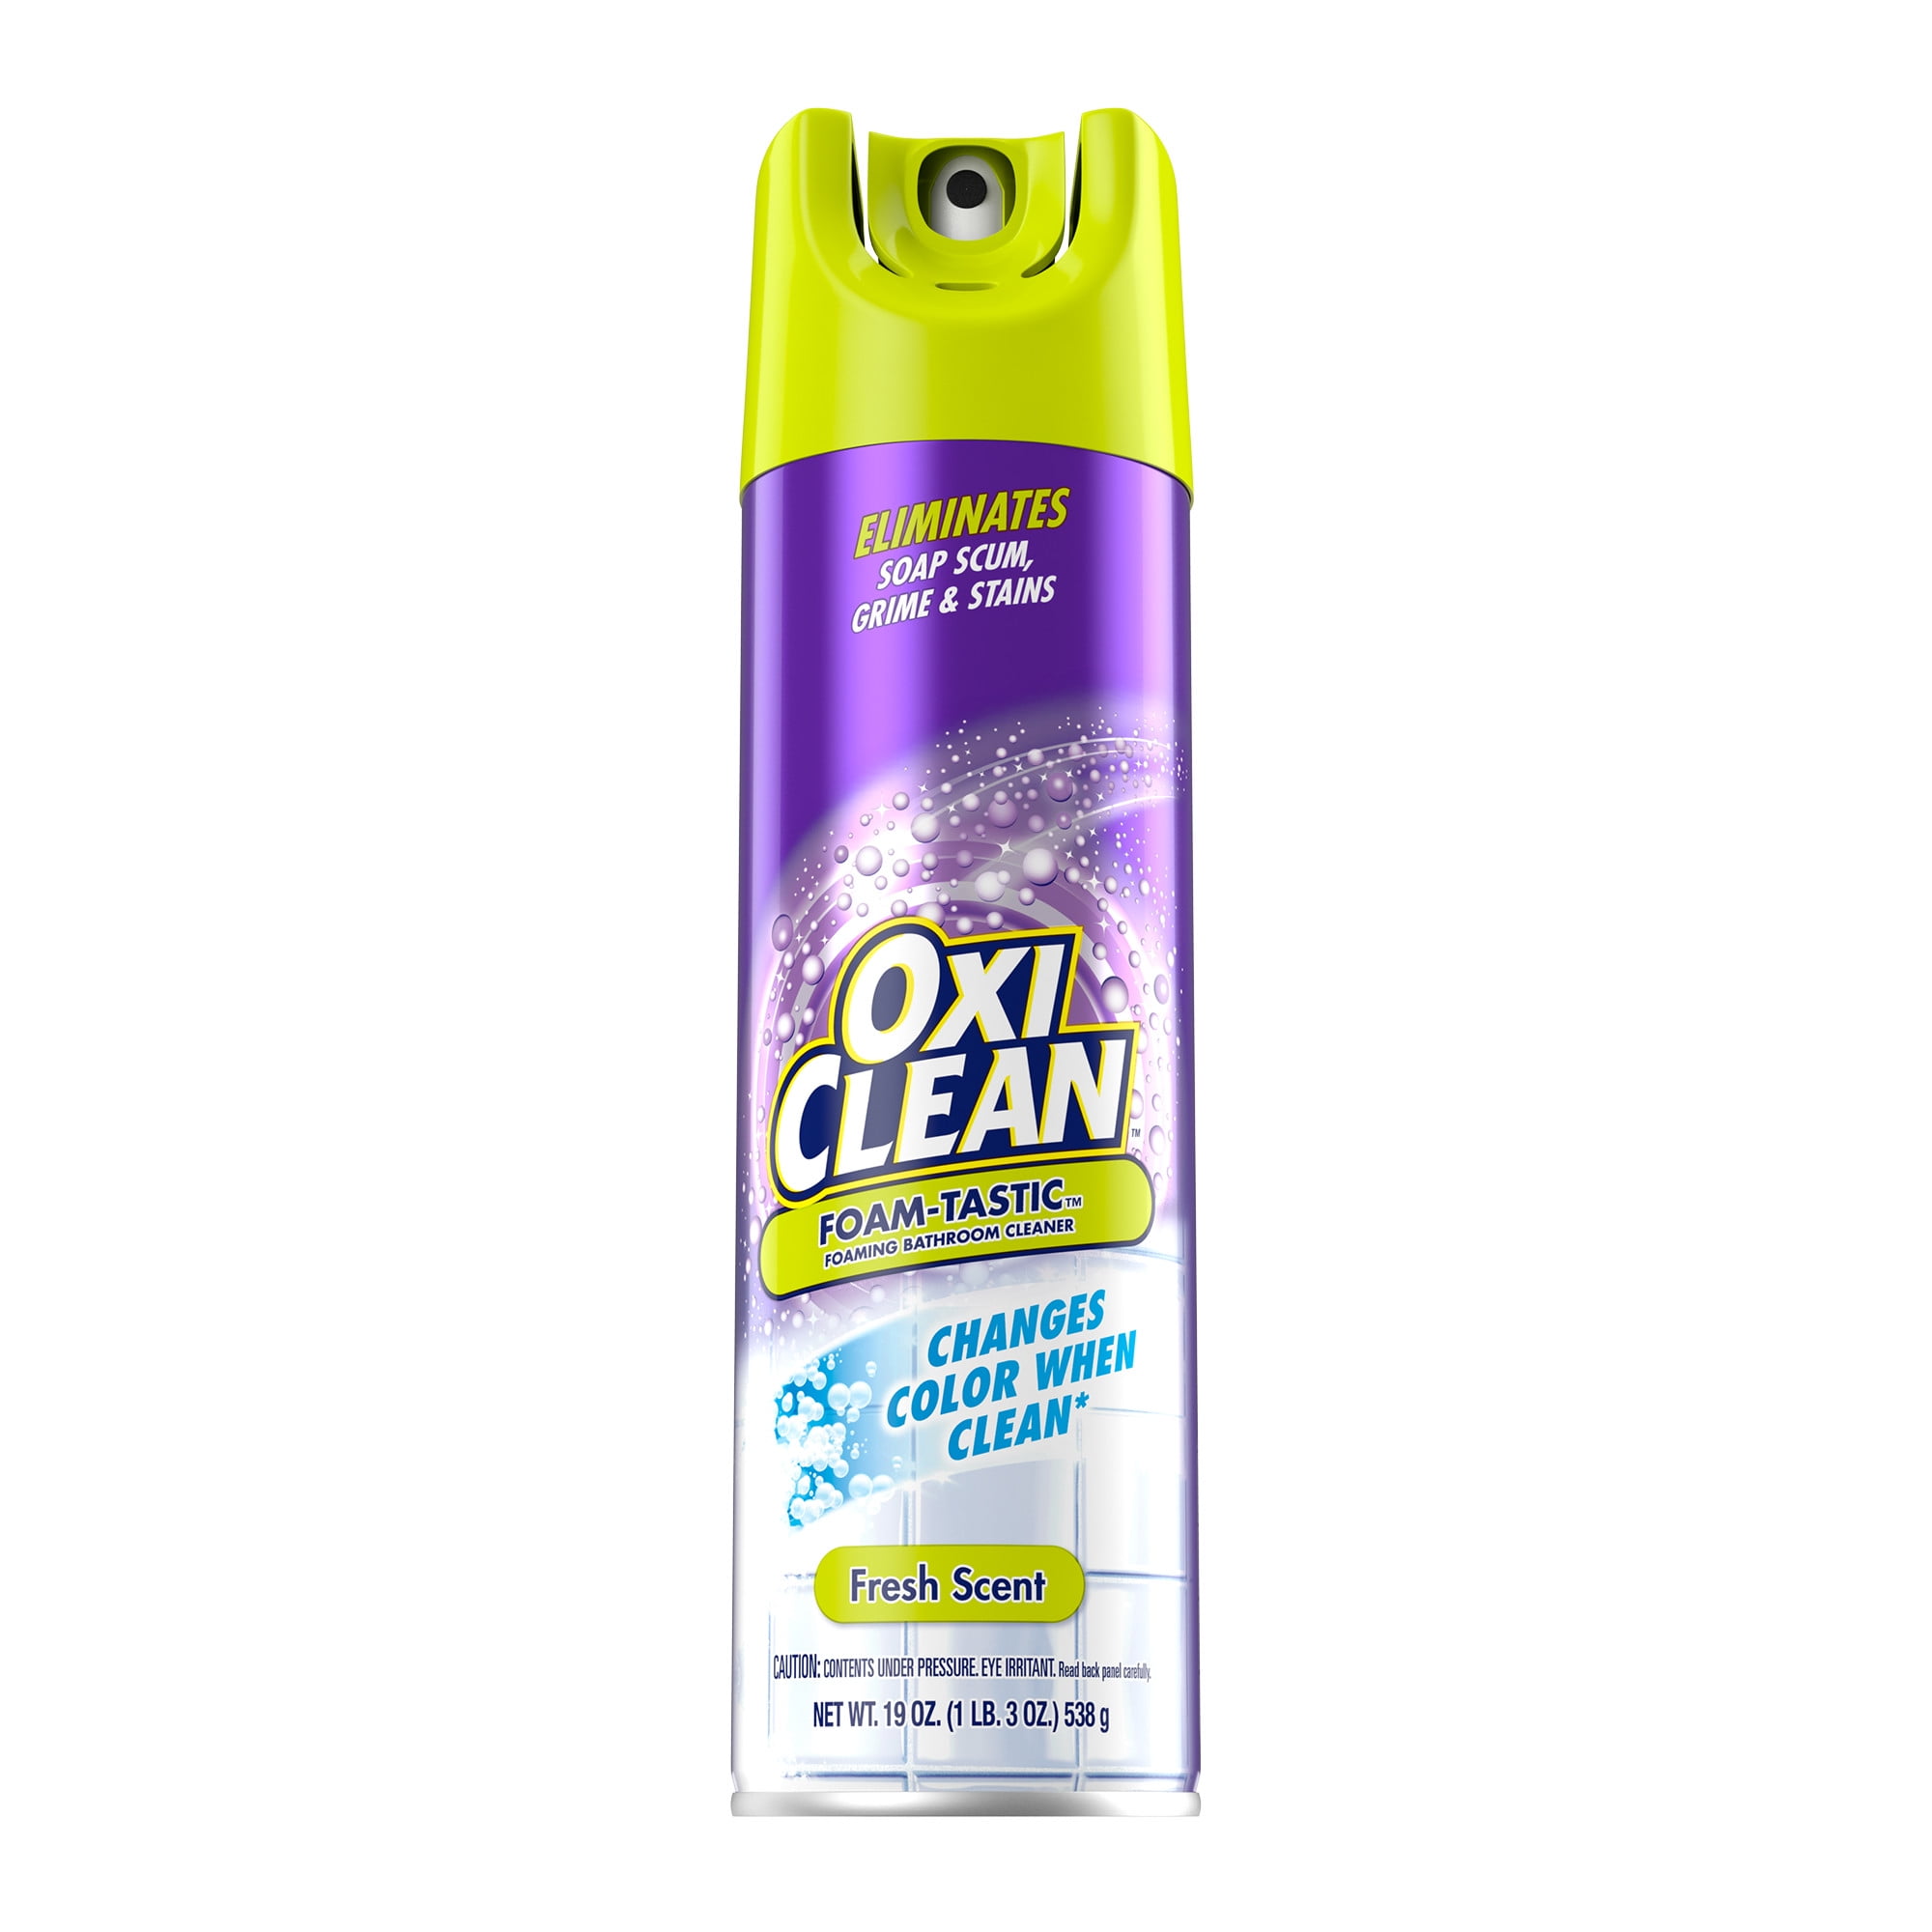 OxiClean Foam-Tastic™ Foaming Bathroom Cleaner, Fresh Scent, 19 oz Spray Can, Eliminates Soap Scum, Grime and Stains